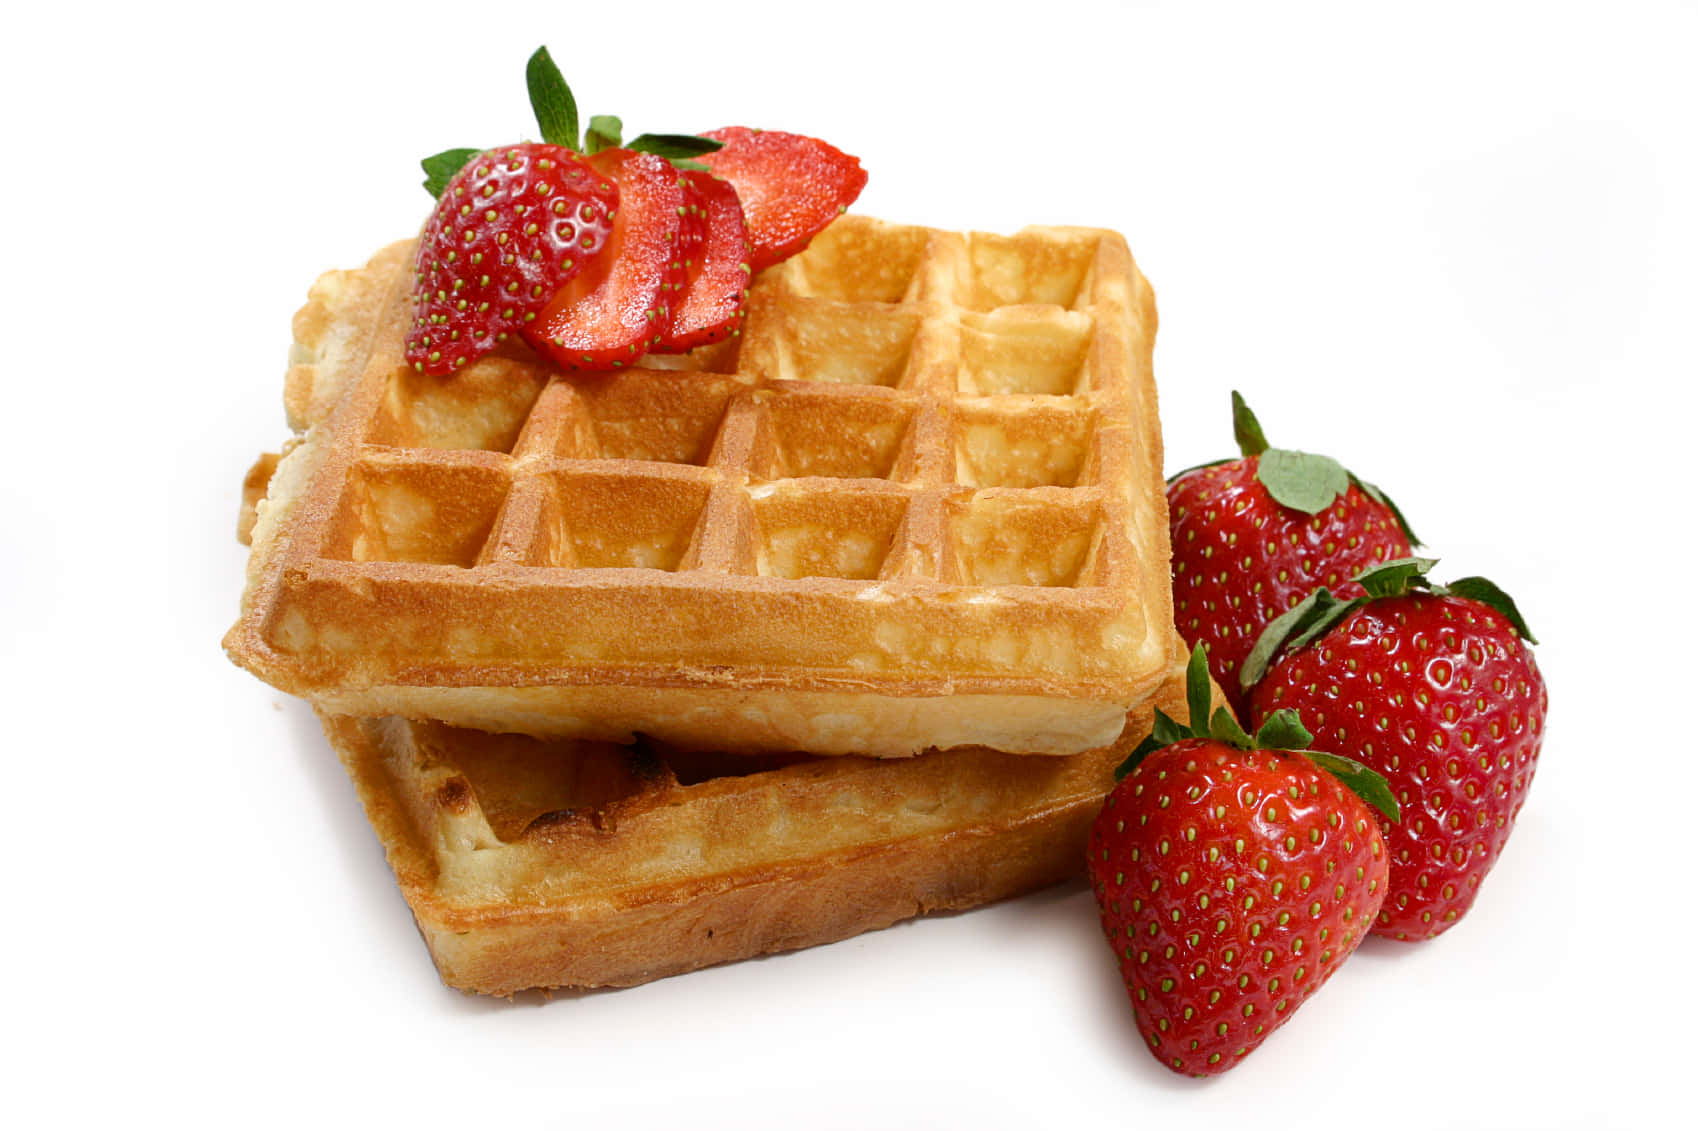 Delicious golden-brown waffles on a plate